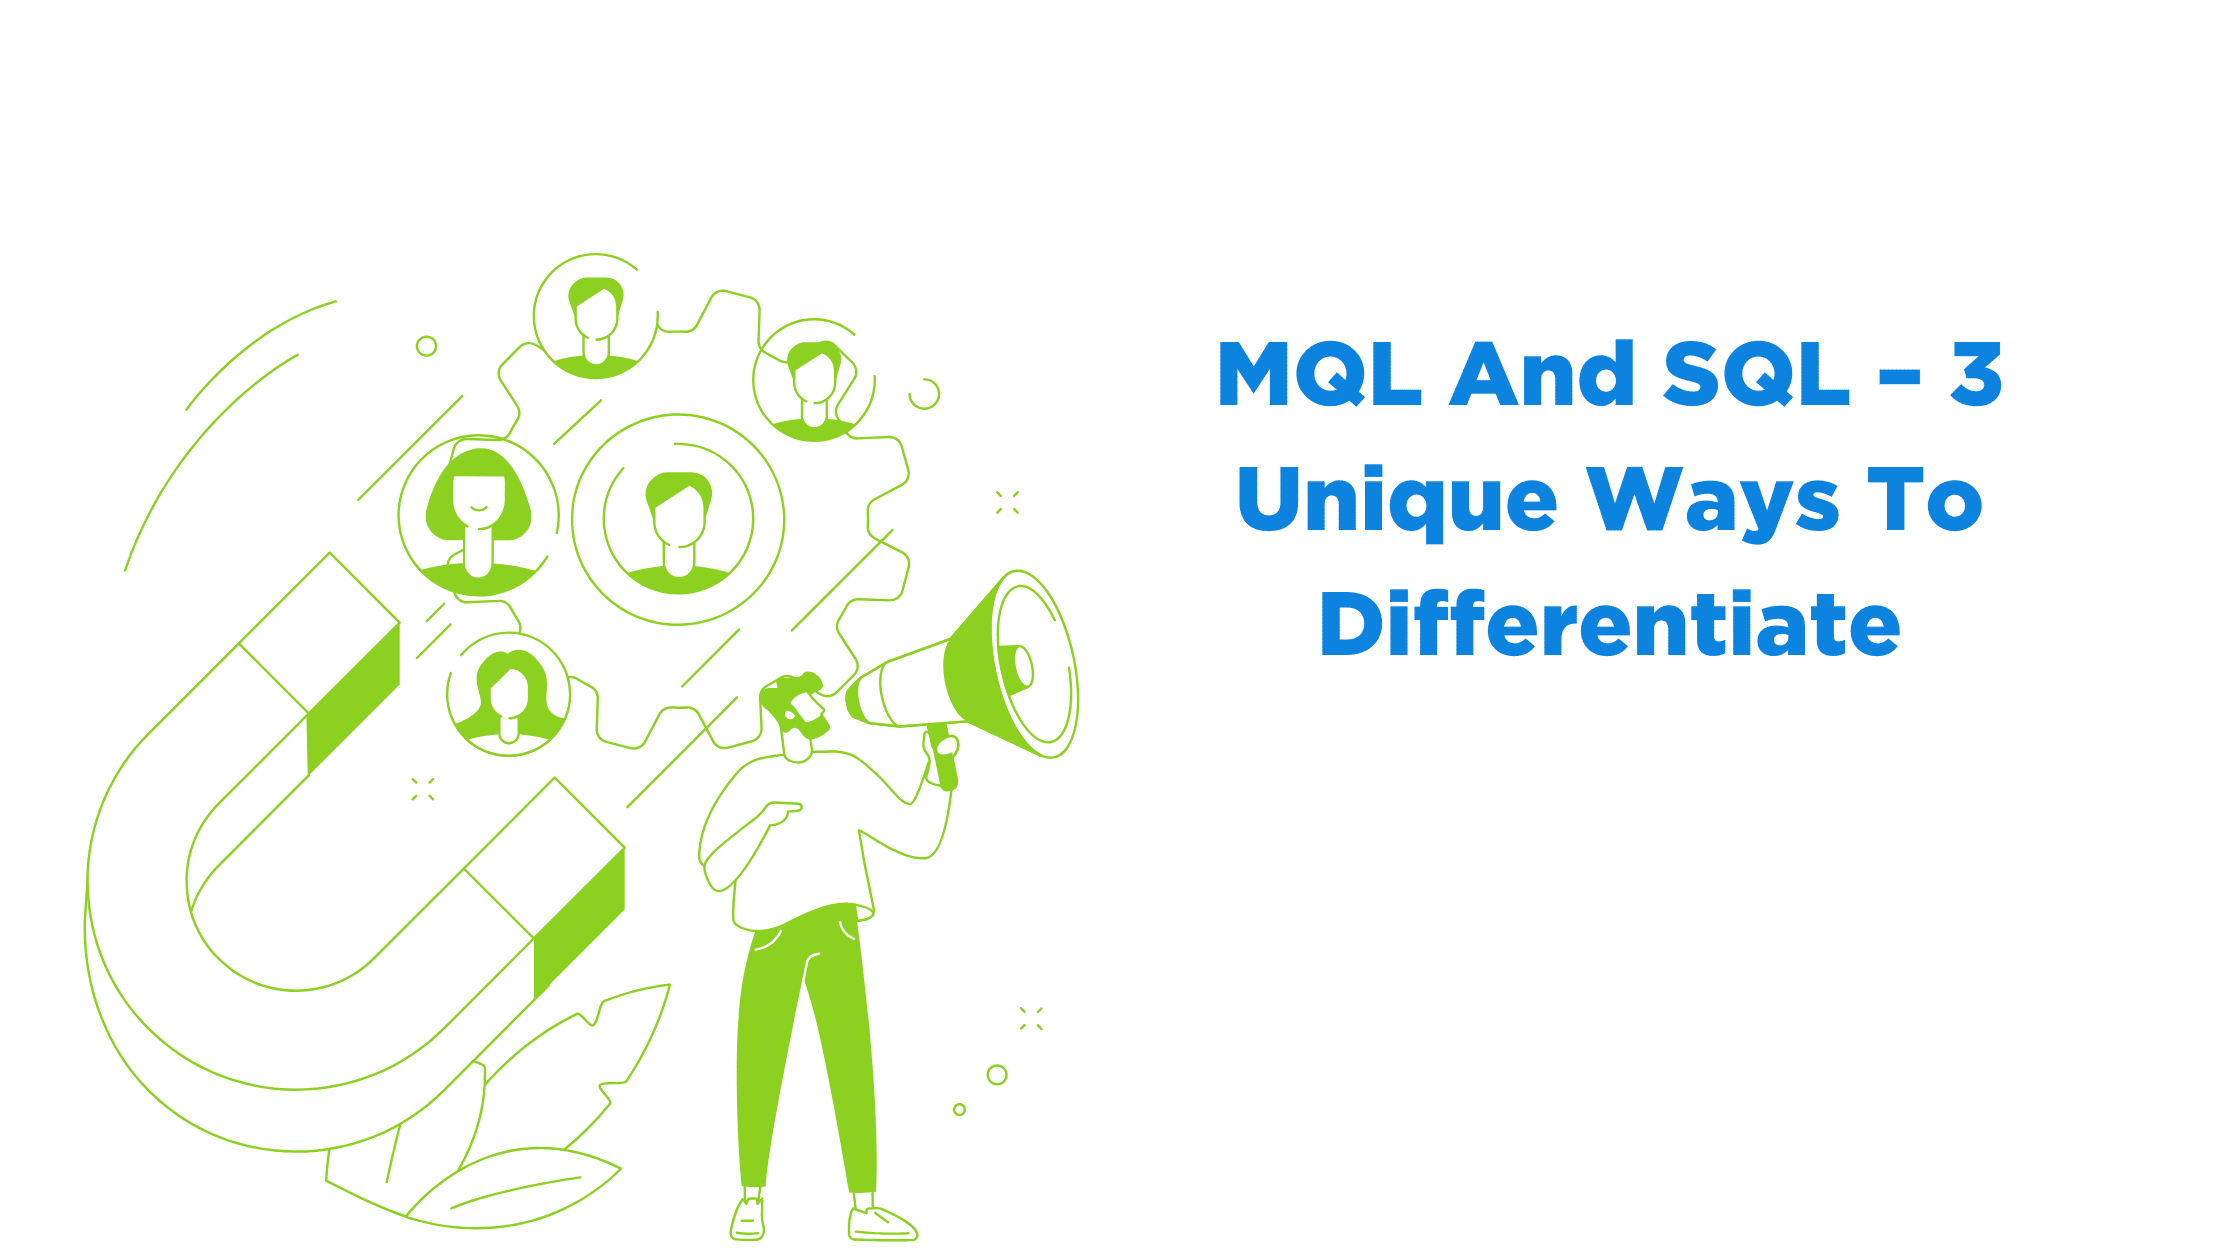 MQL And SQL – 3 Unique Ways To Differentiate